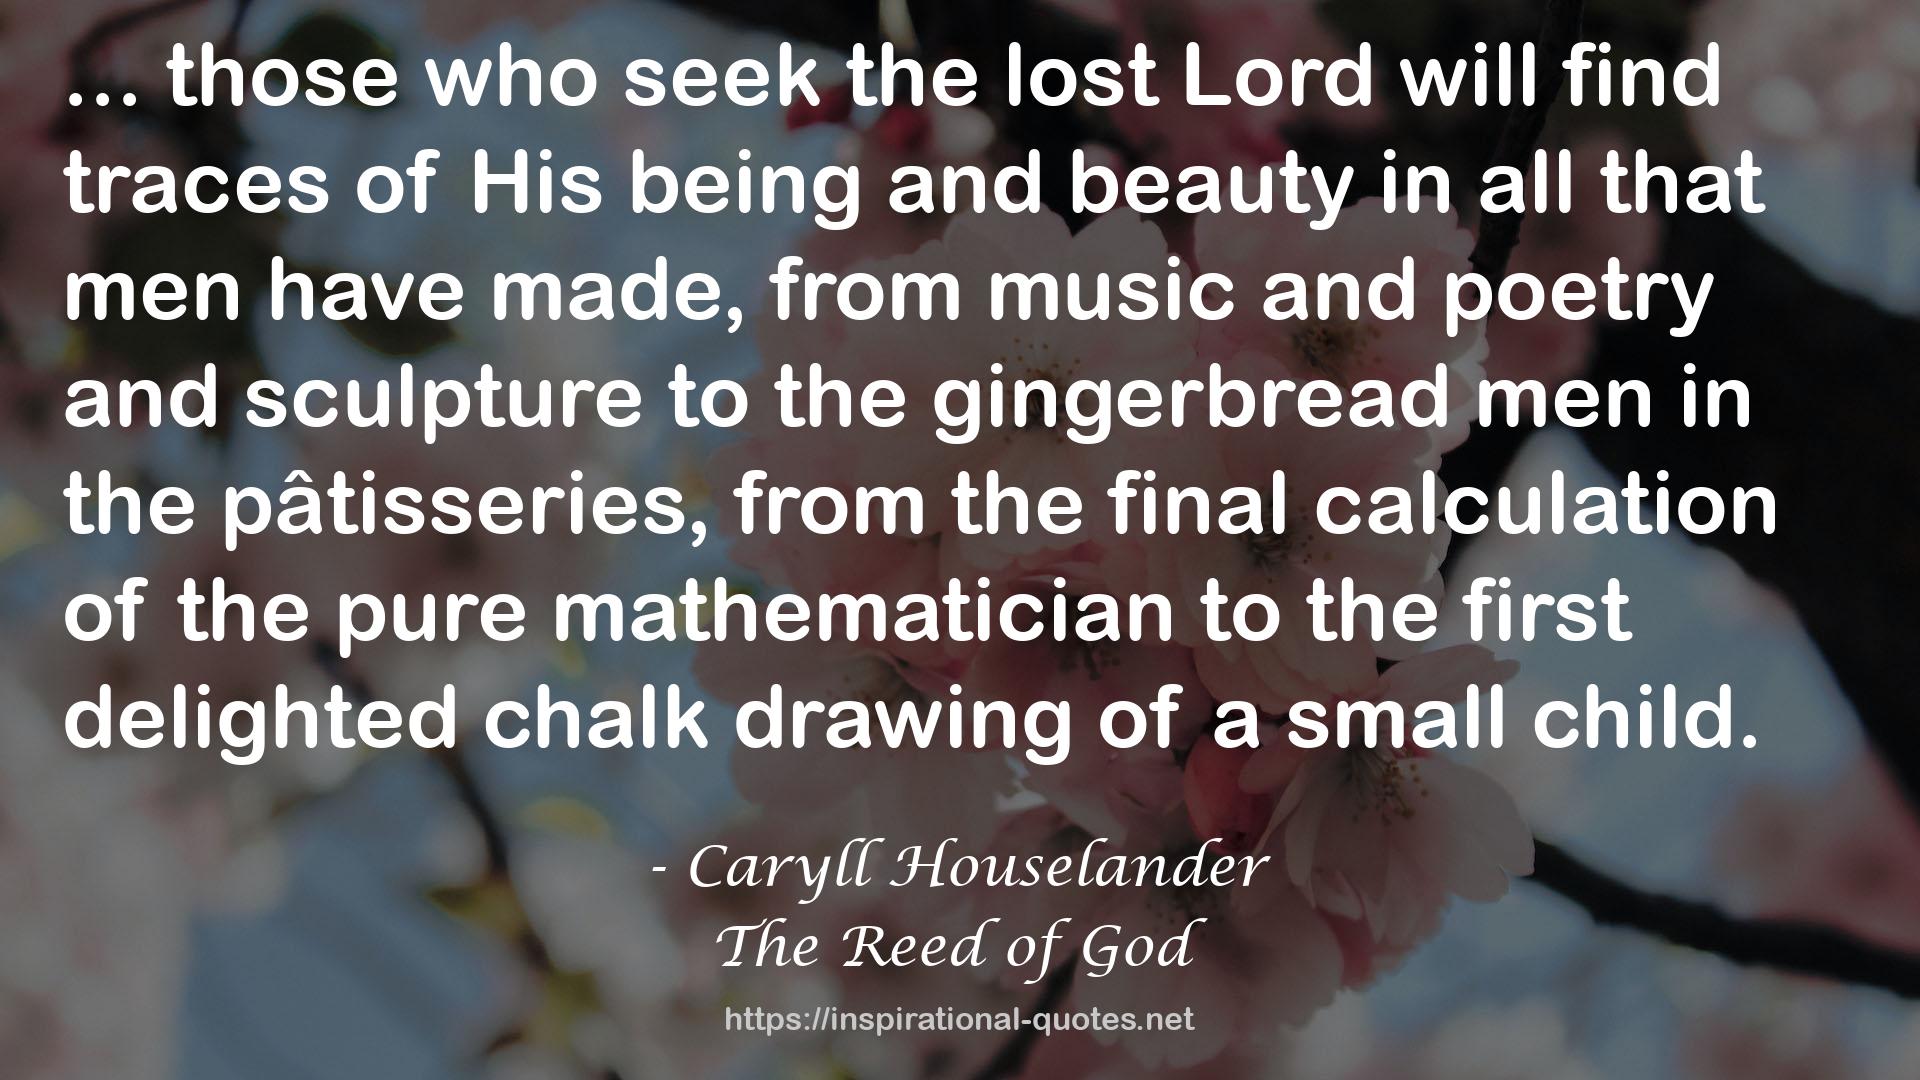 Caryll Houselander QUOTES